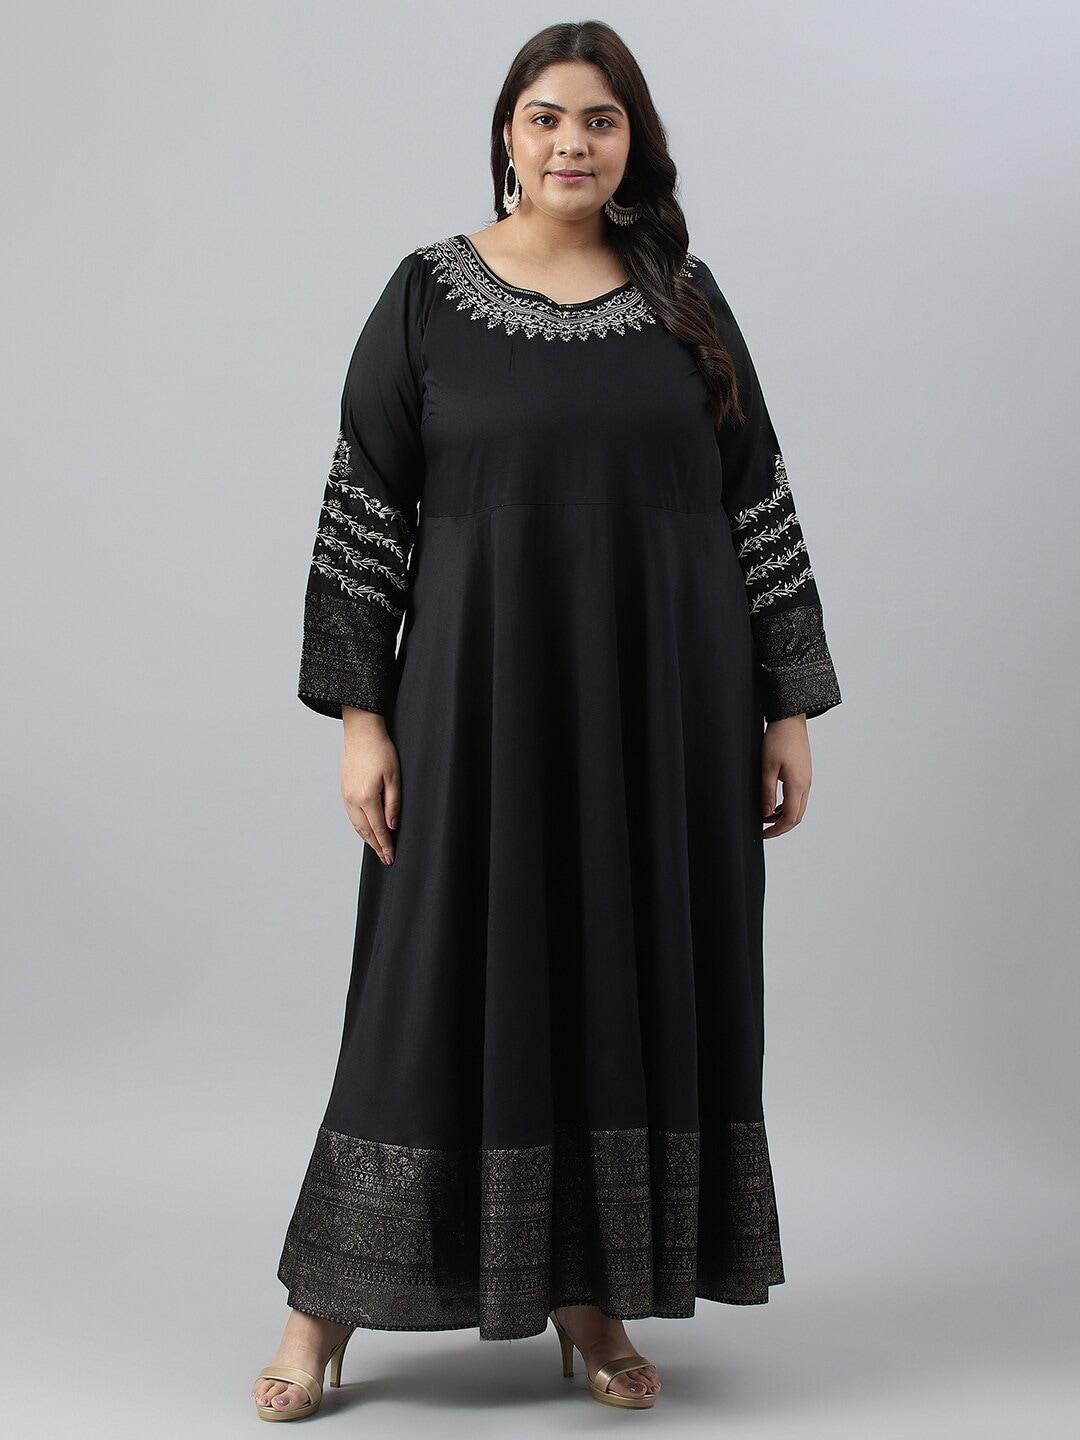 w-plus-size-floral-embroidered-ethnic-maxi-dress